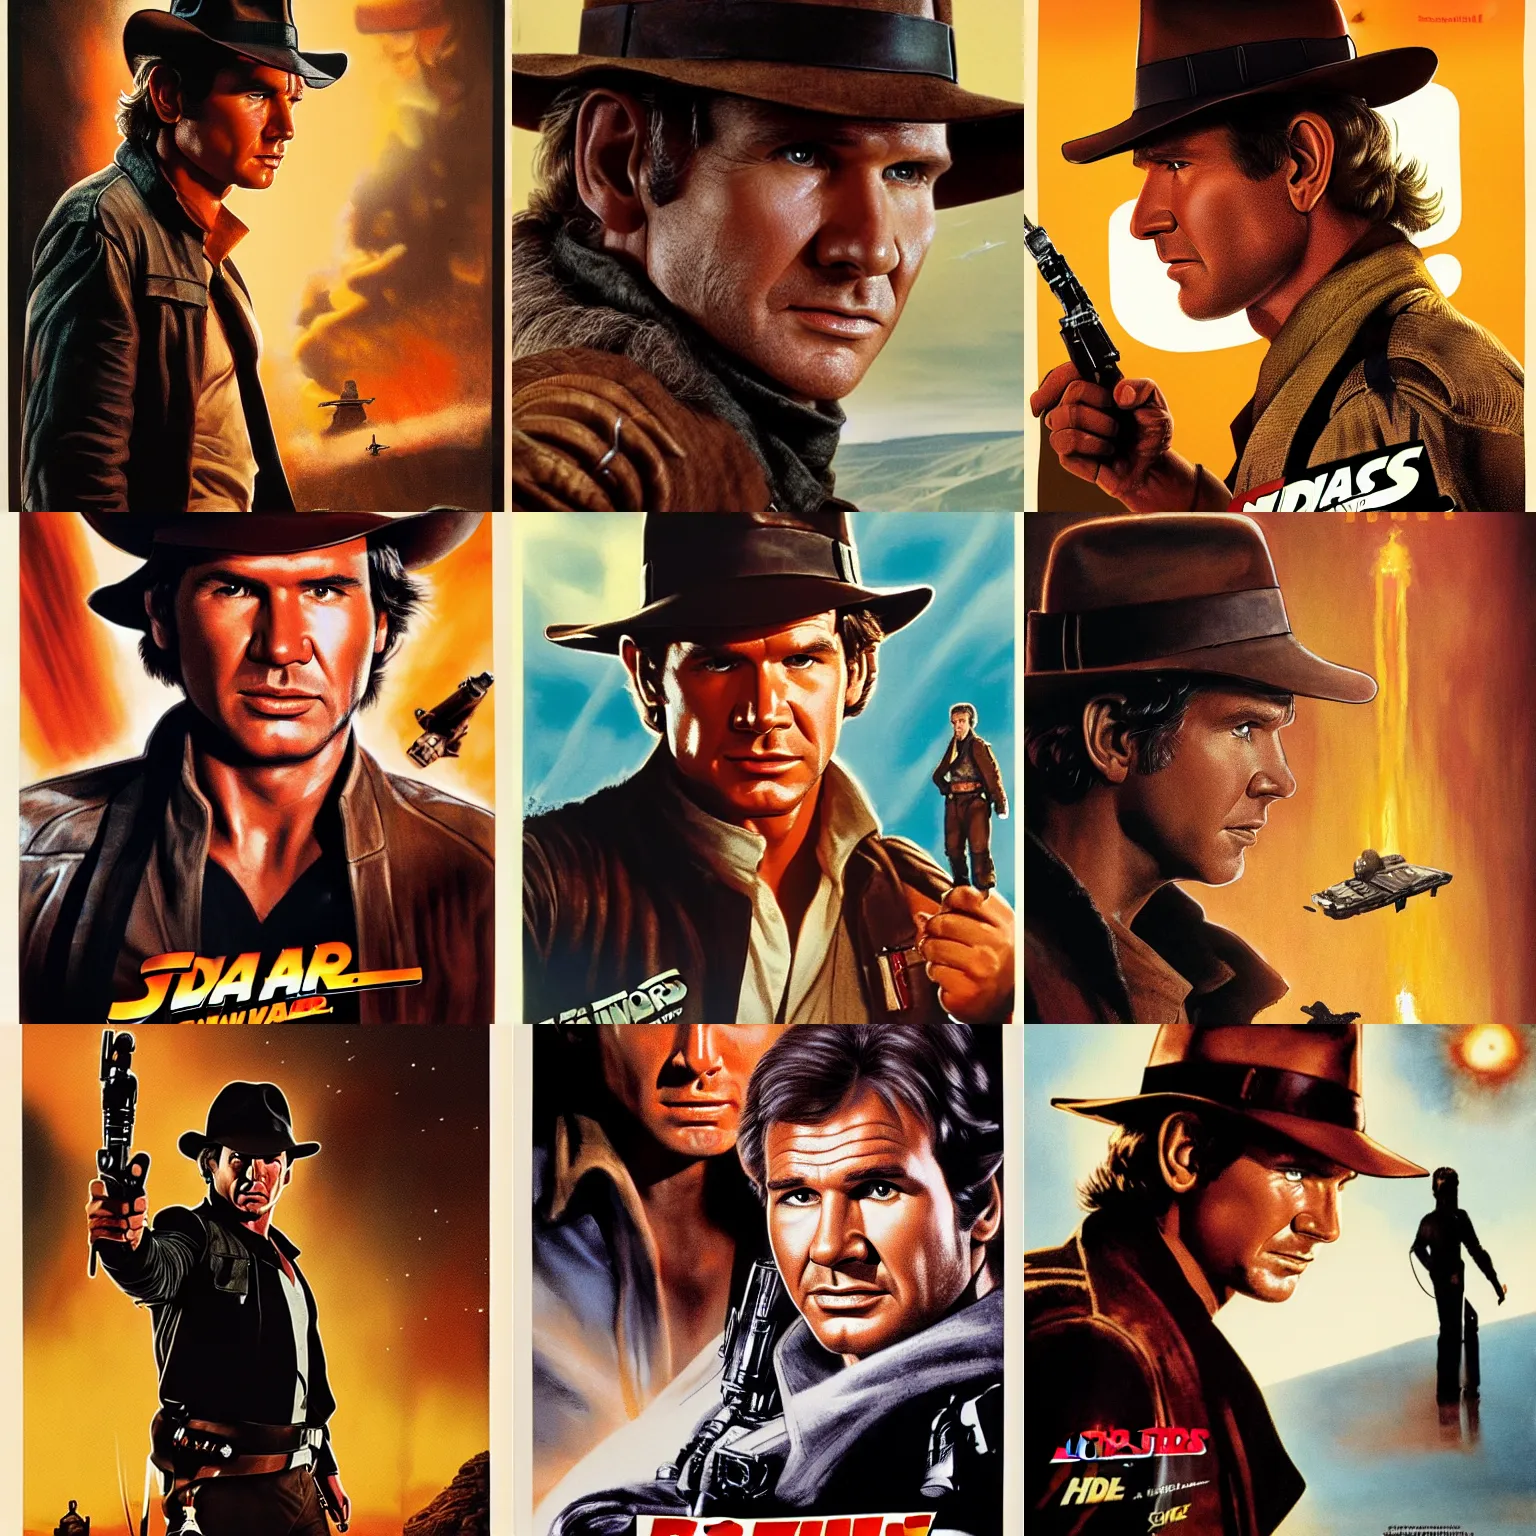 Prompt: side view of han solo facing indiana jones, movie poster by steven spielberg